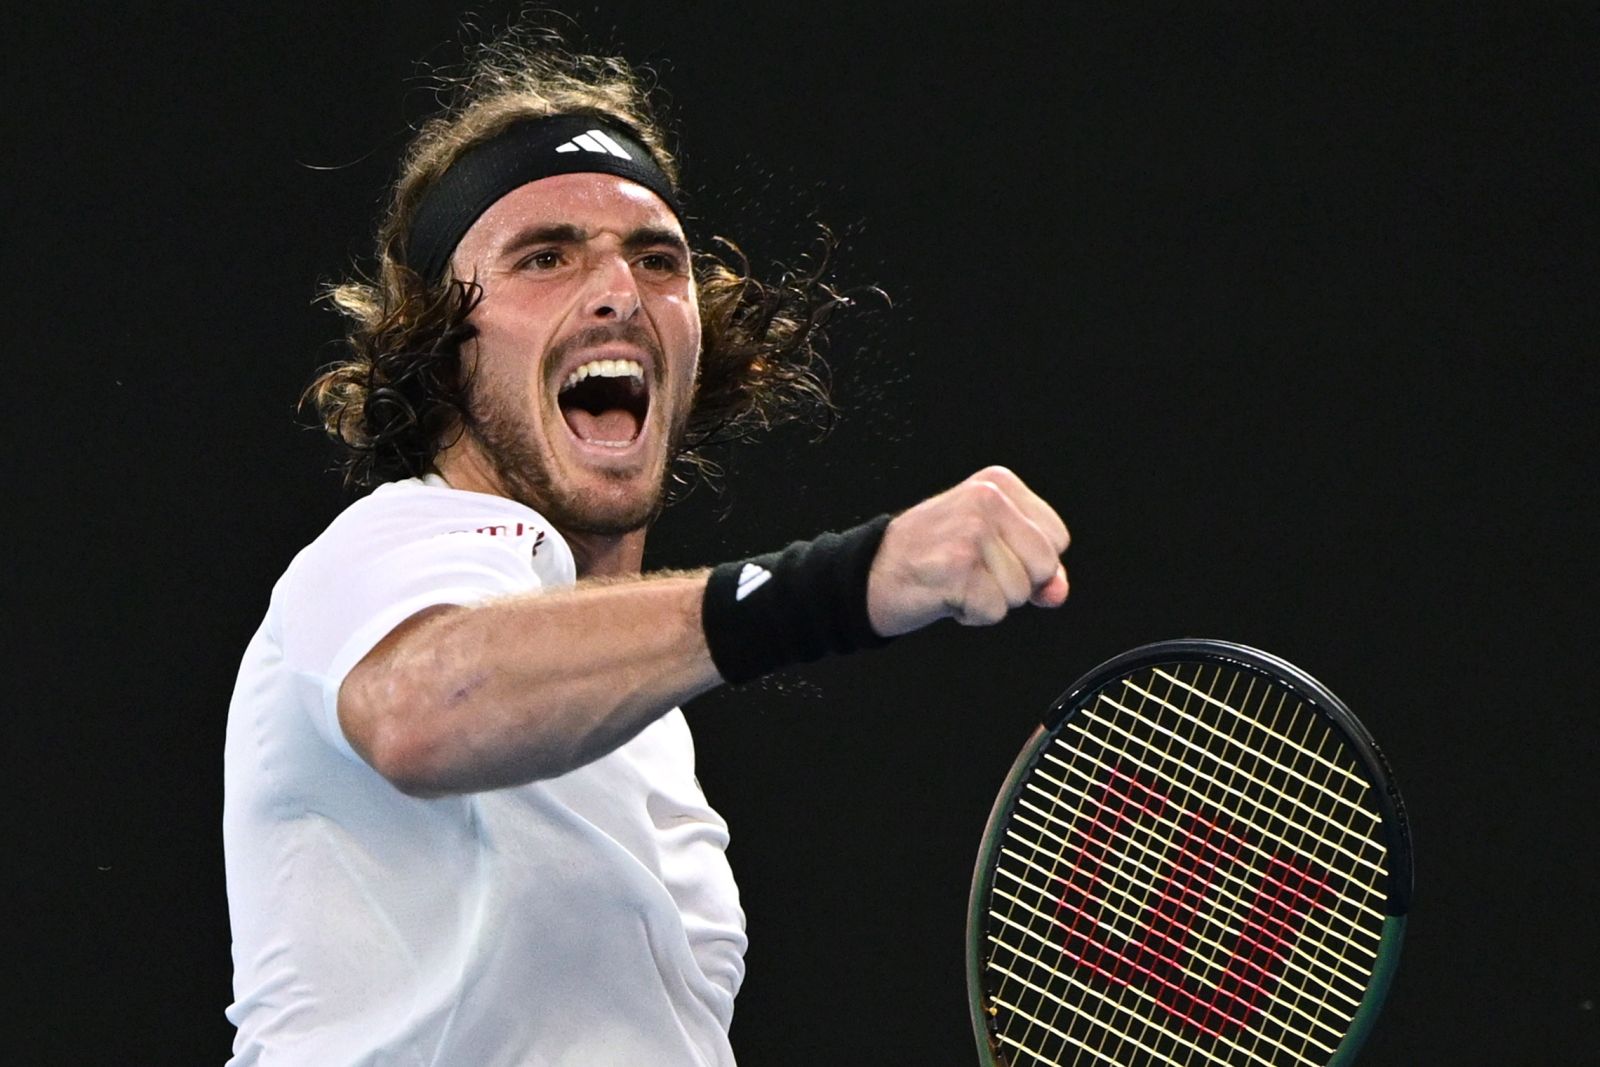 epa10422198 Stefanos Tsitsipas of Greece reacts during his 4th round match against Jannik Sinner of Italy at the 2023 Australian Open tennis tournament in Melbourne, Australia, 22 January 2023.  EPA/JOEL CARRETT  AUSTRALIA AND NEW ZEALAND OUT